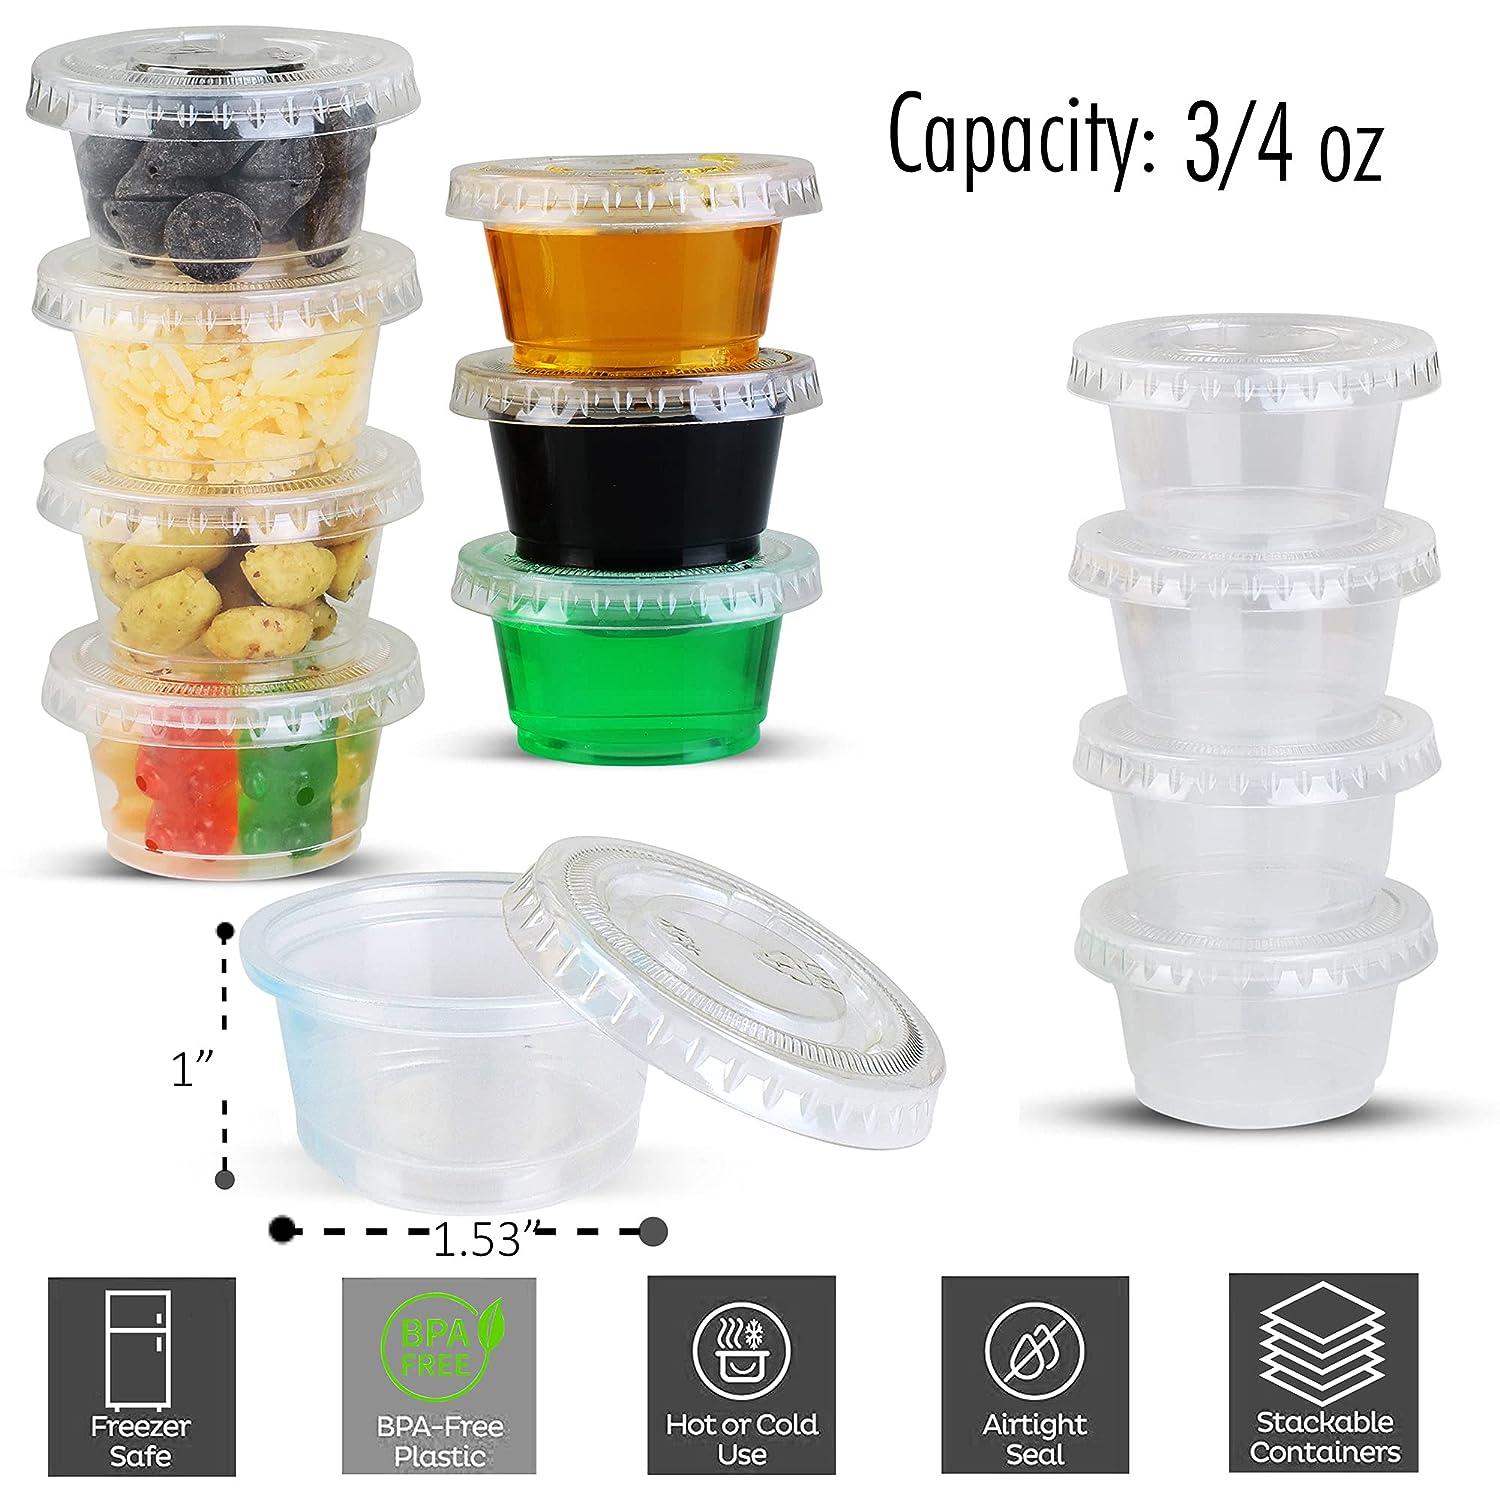 0.75 Oz) Medicine Cups with Lids - Condiment Containers, Small